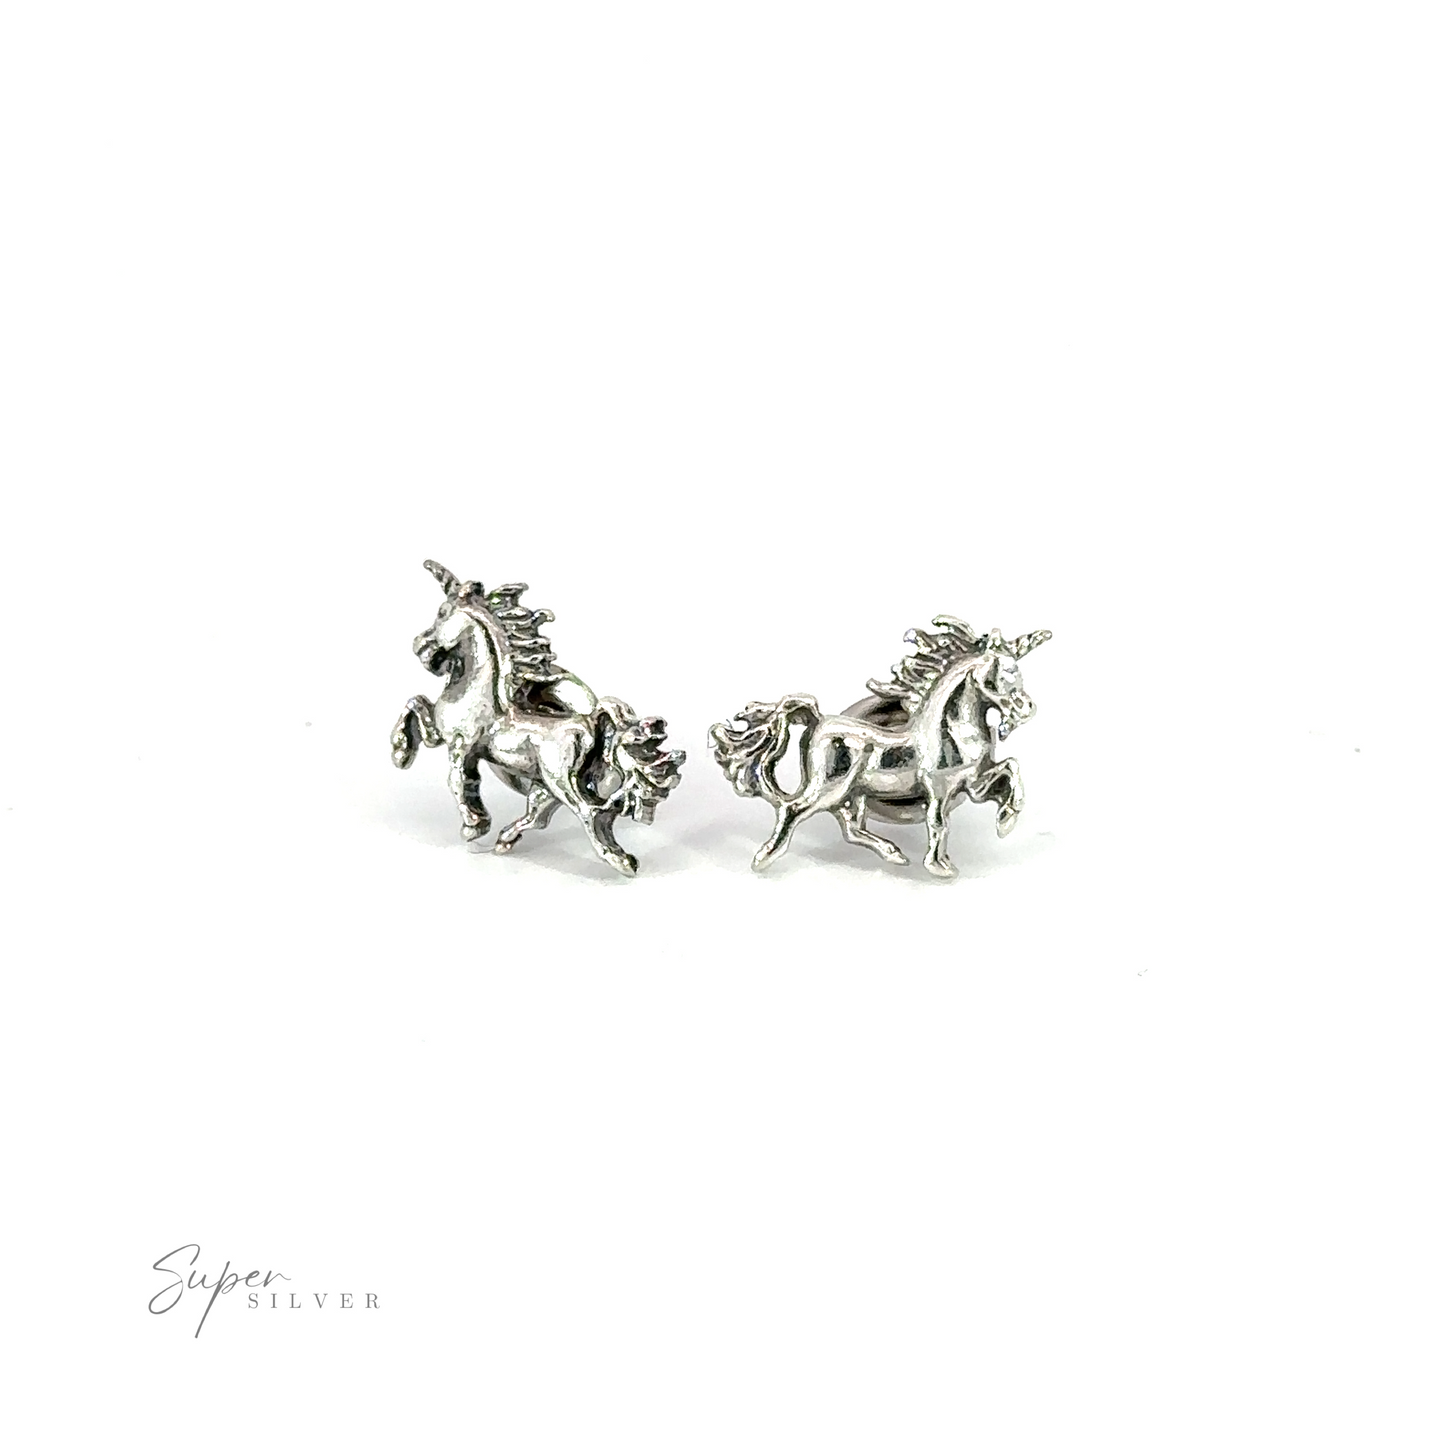 A pair of silver Unicorn Studs, showcasing these mythical creatures on a white background.